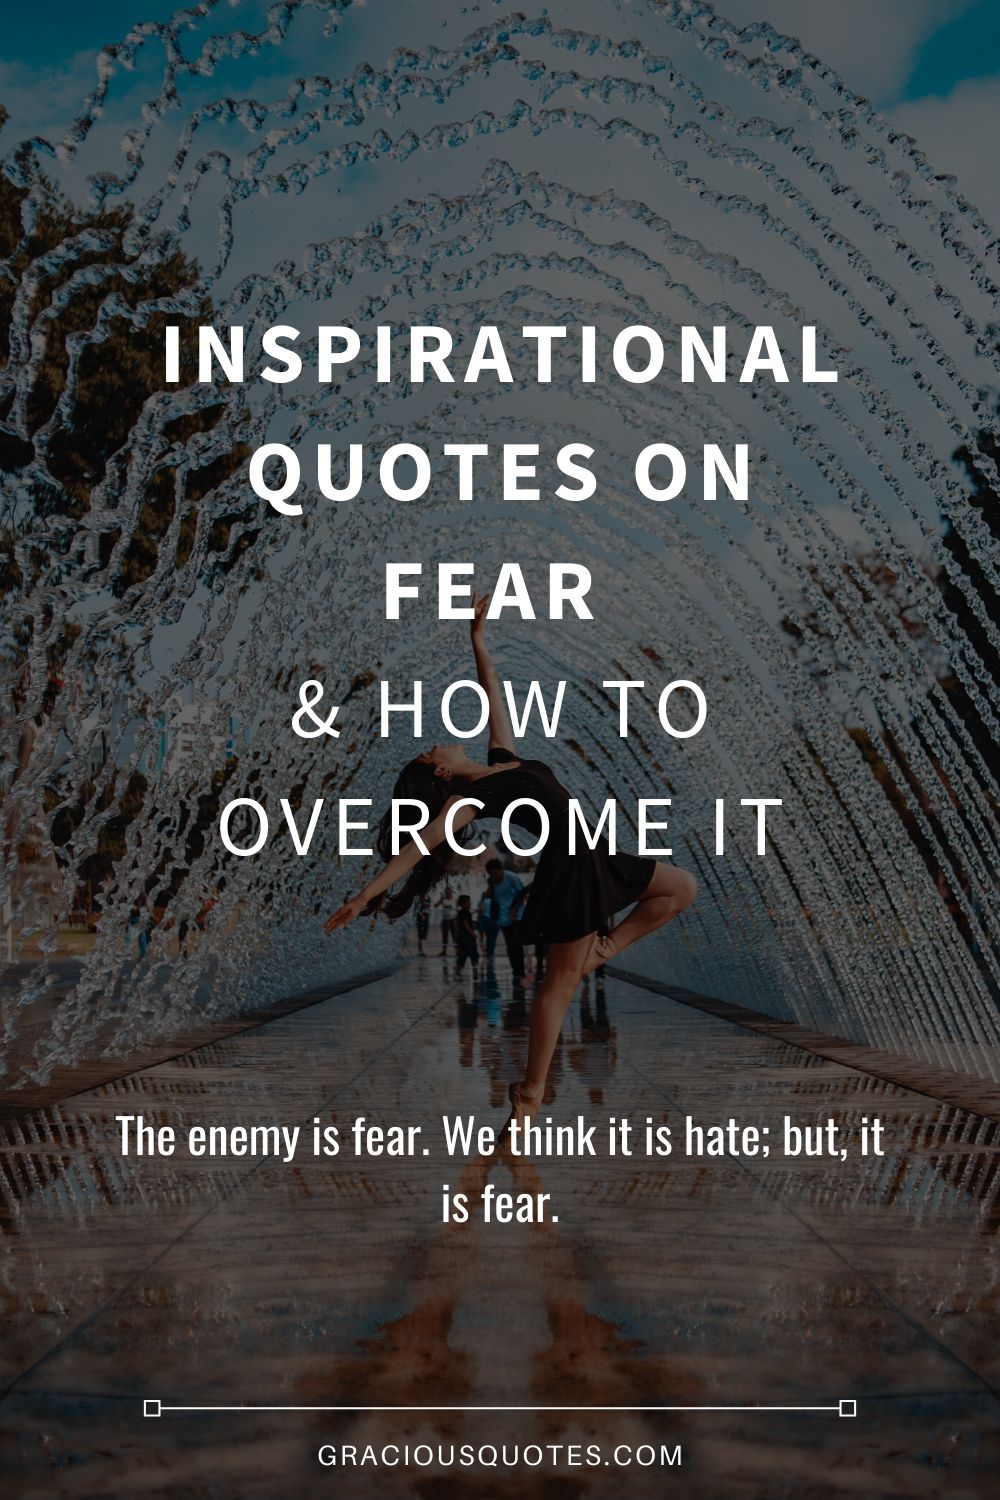 Inspirational-Quotes-on-Fear-How-to-Overcome-It-Gracious-Quotes